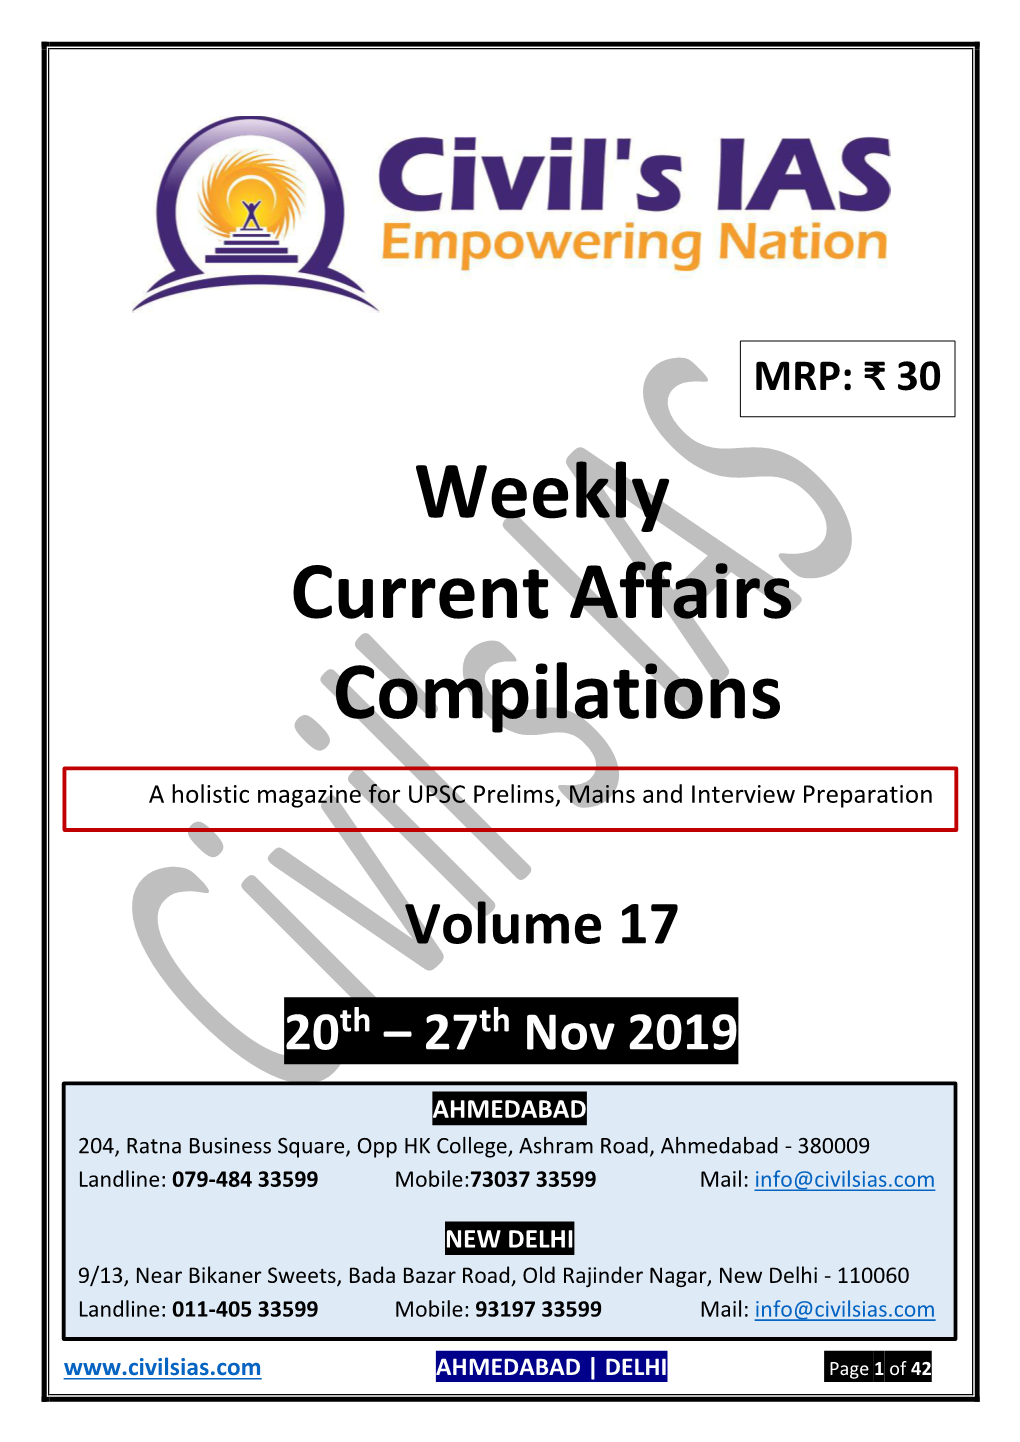 Weekly Current Affairs Compilations